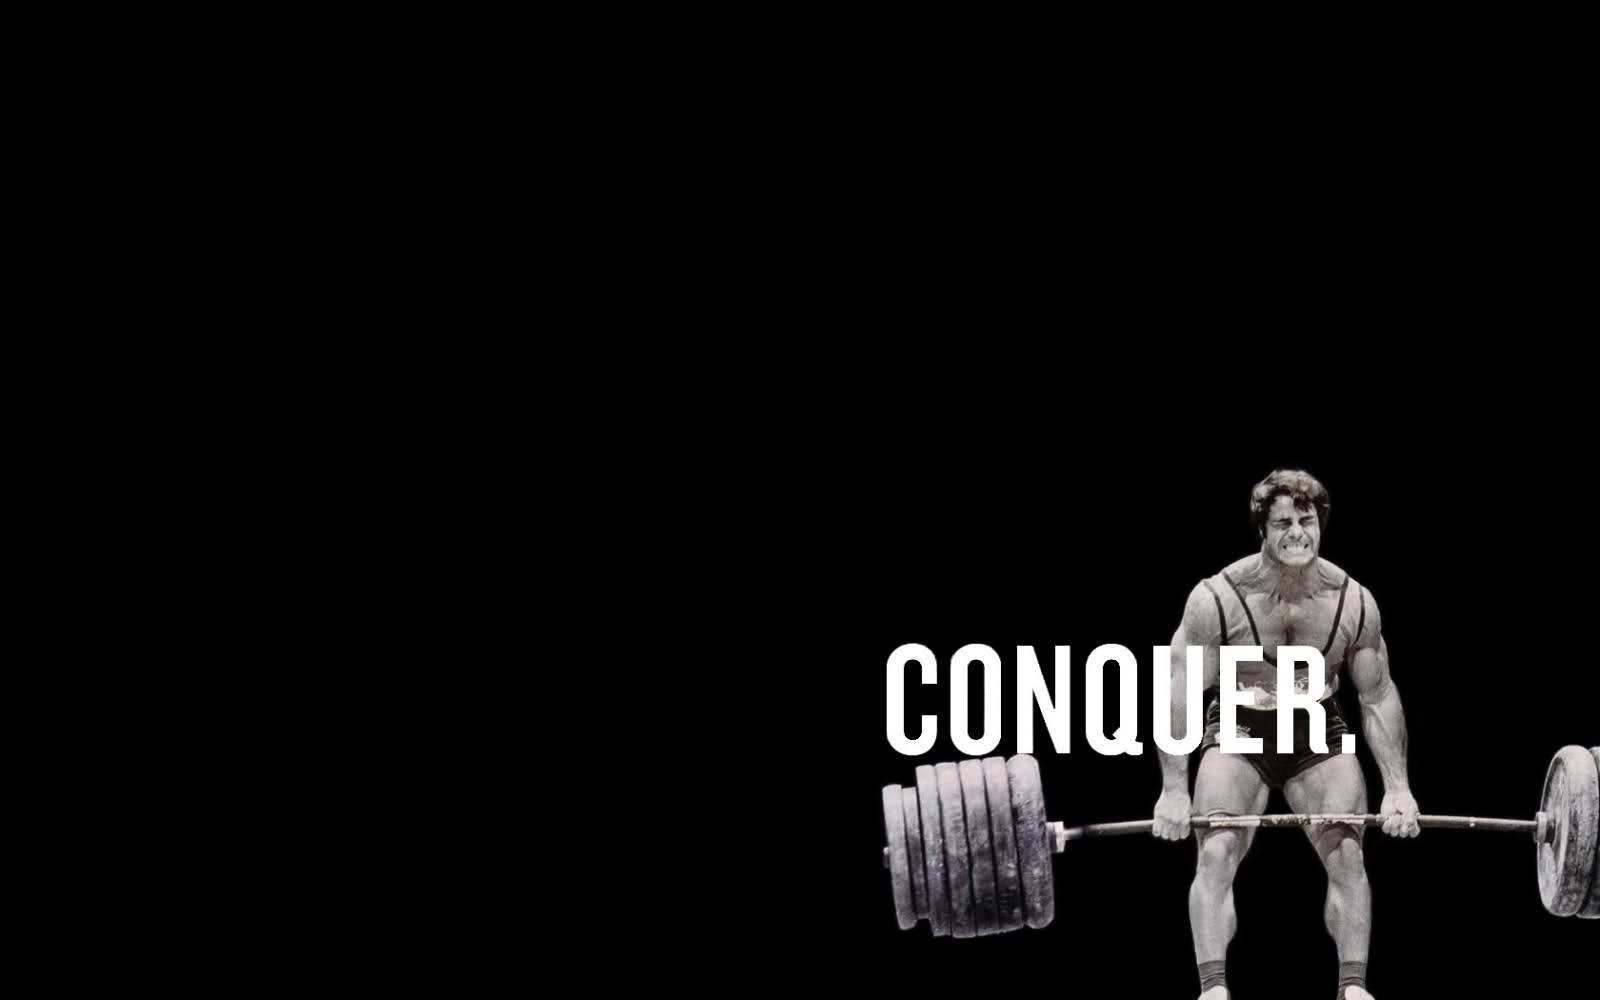 "Conquer" Weight Lifting Quote Wallpaper